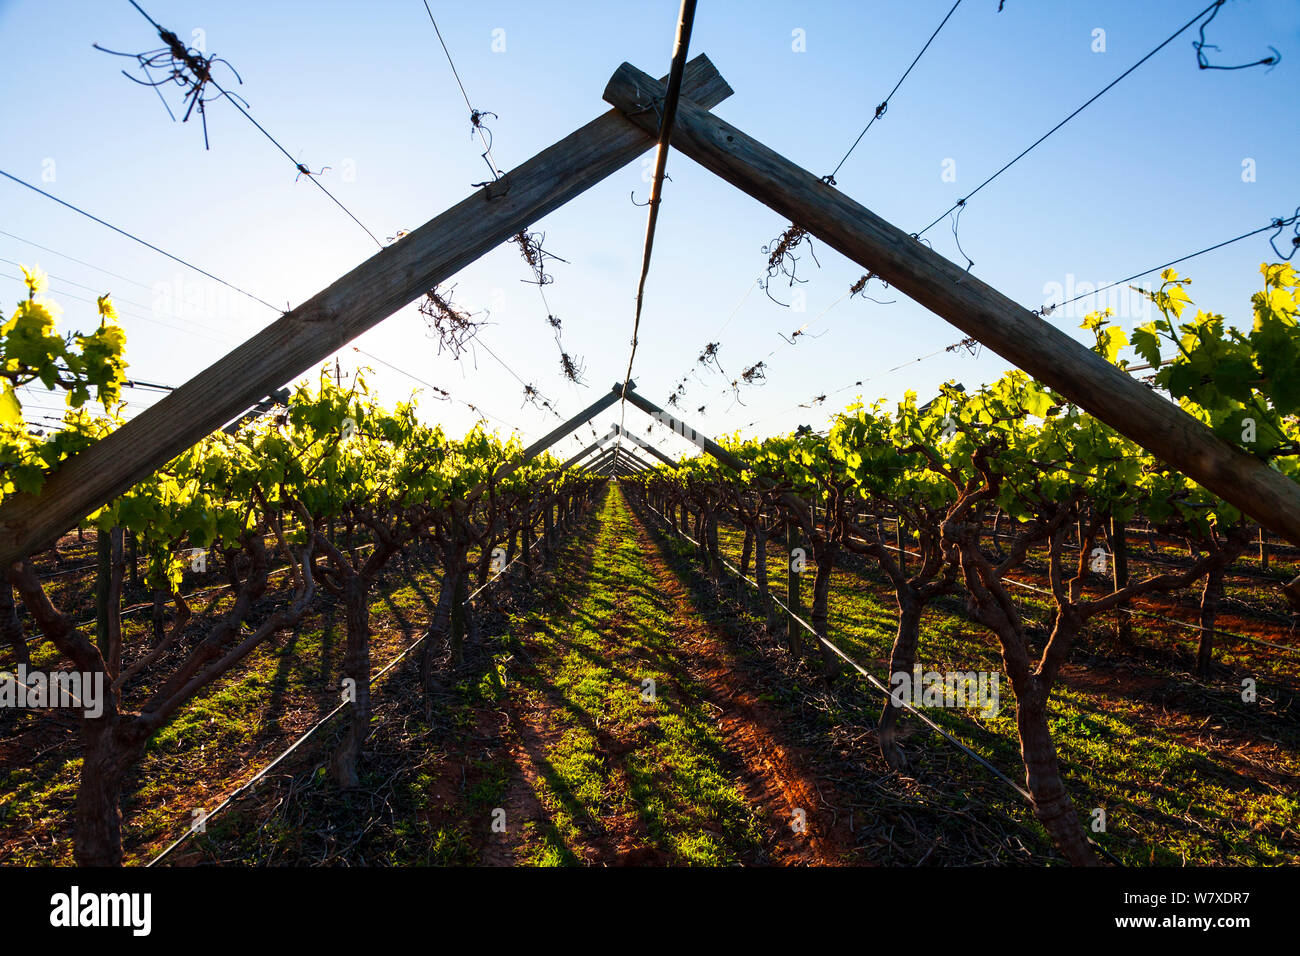 Vineyard with  wire and wooden frame, Vanrhynsdorp, Western Cape province, South Africa, September 2012. Stock Photo